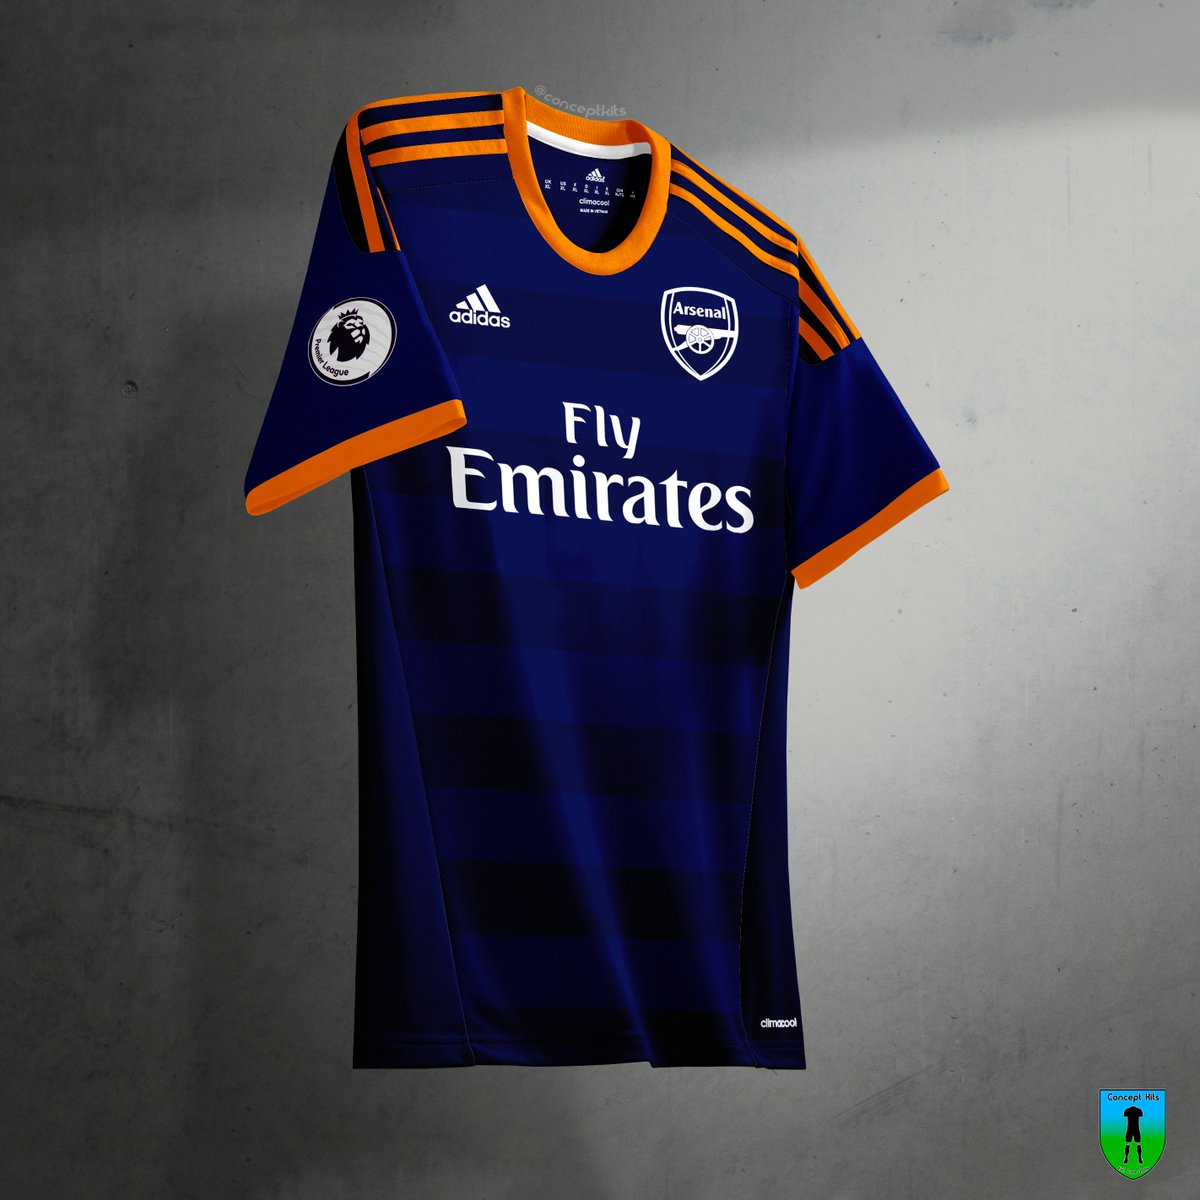 Concept Kits on Twitter: "Arsenal Football Club home, away and third